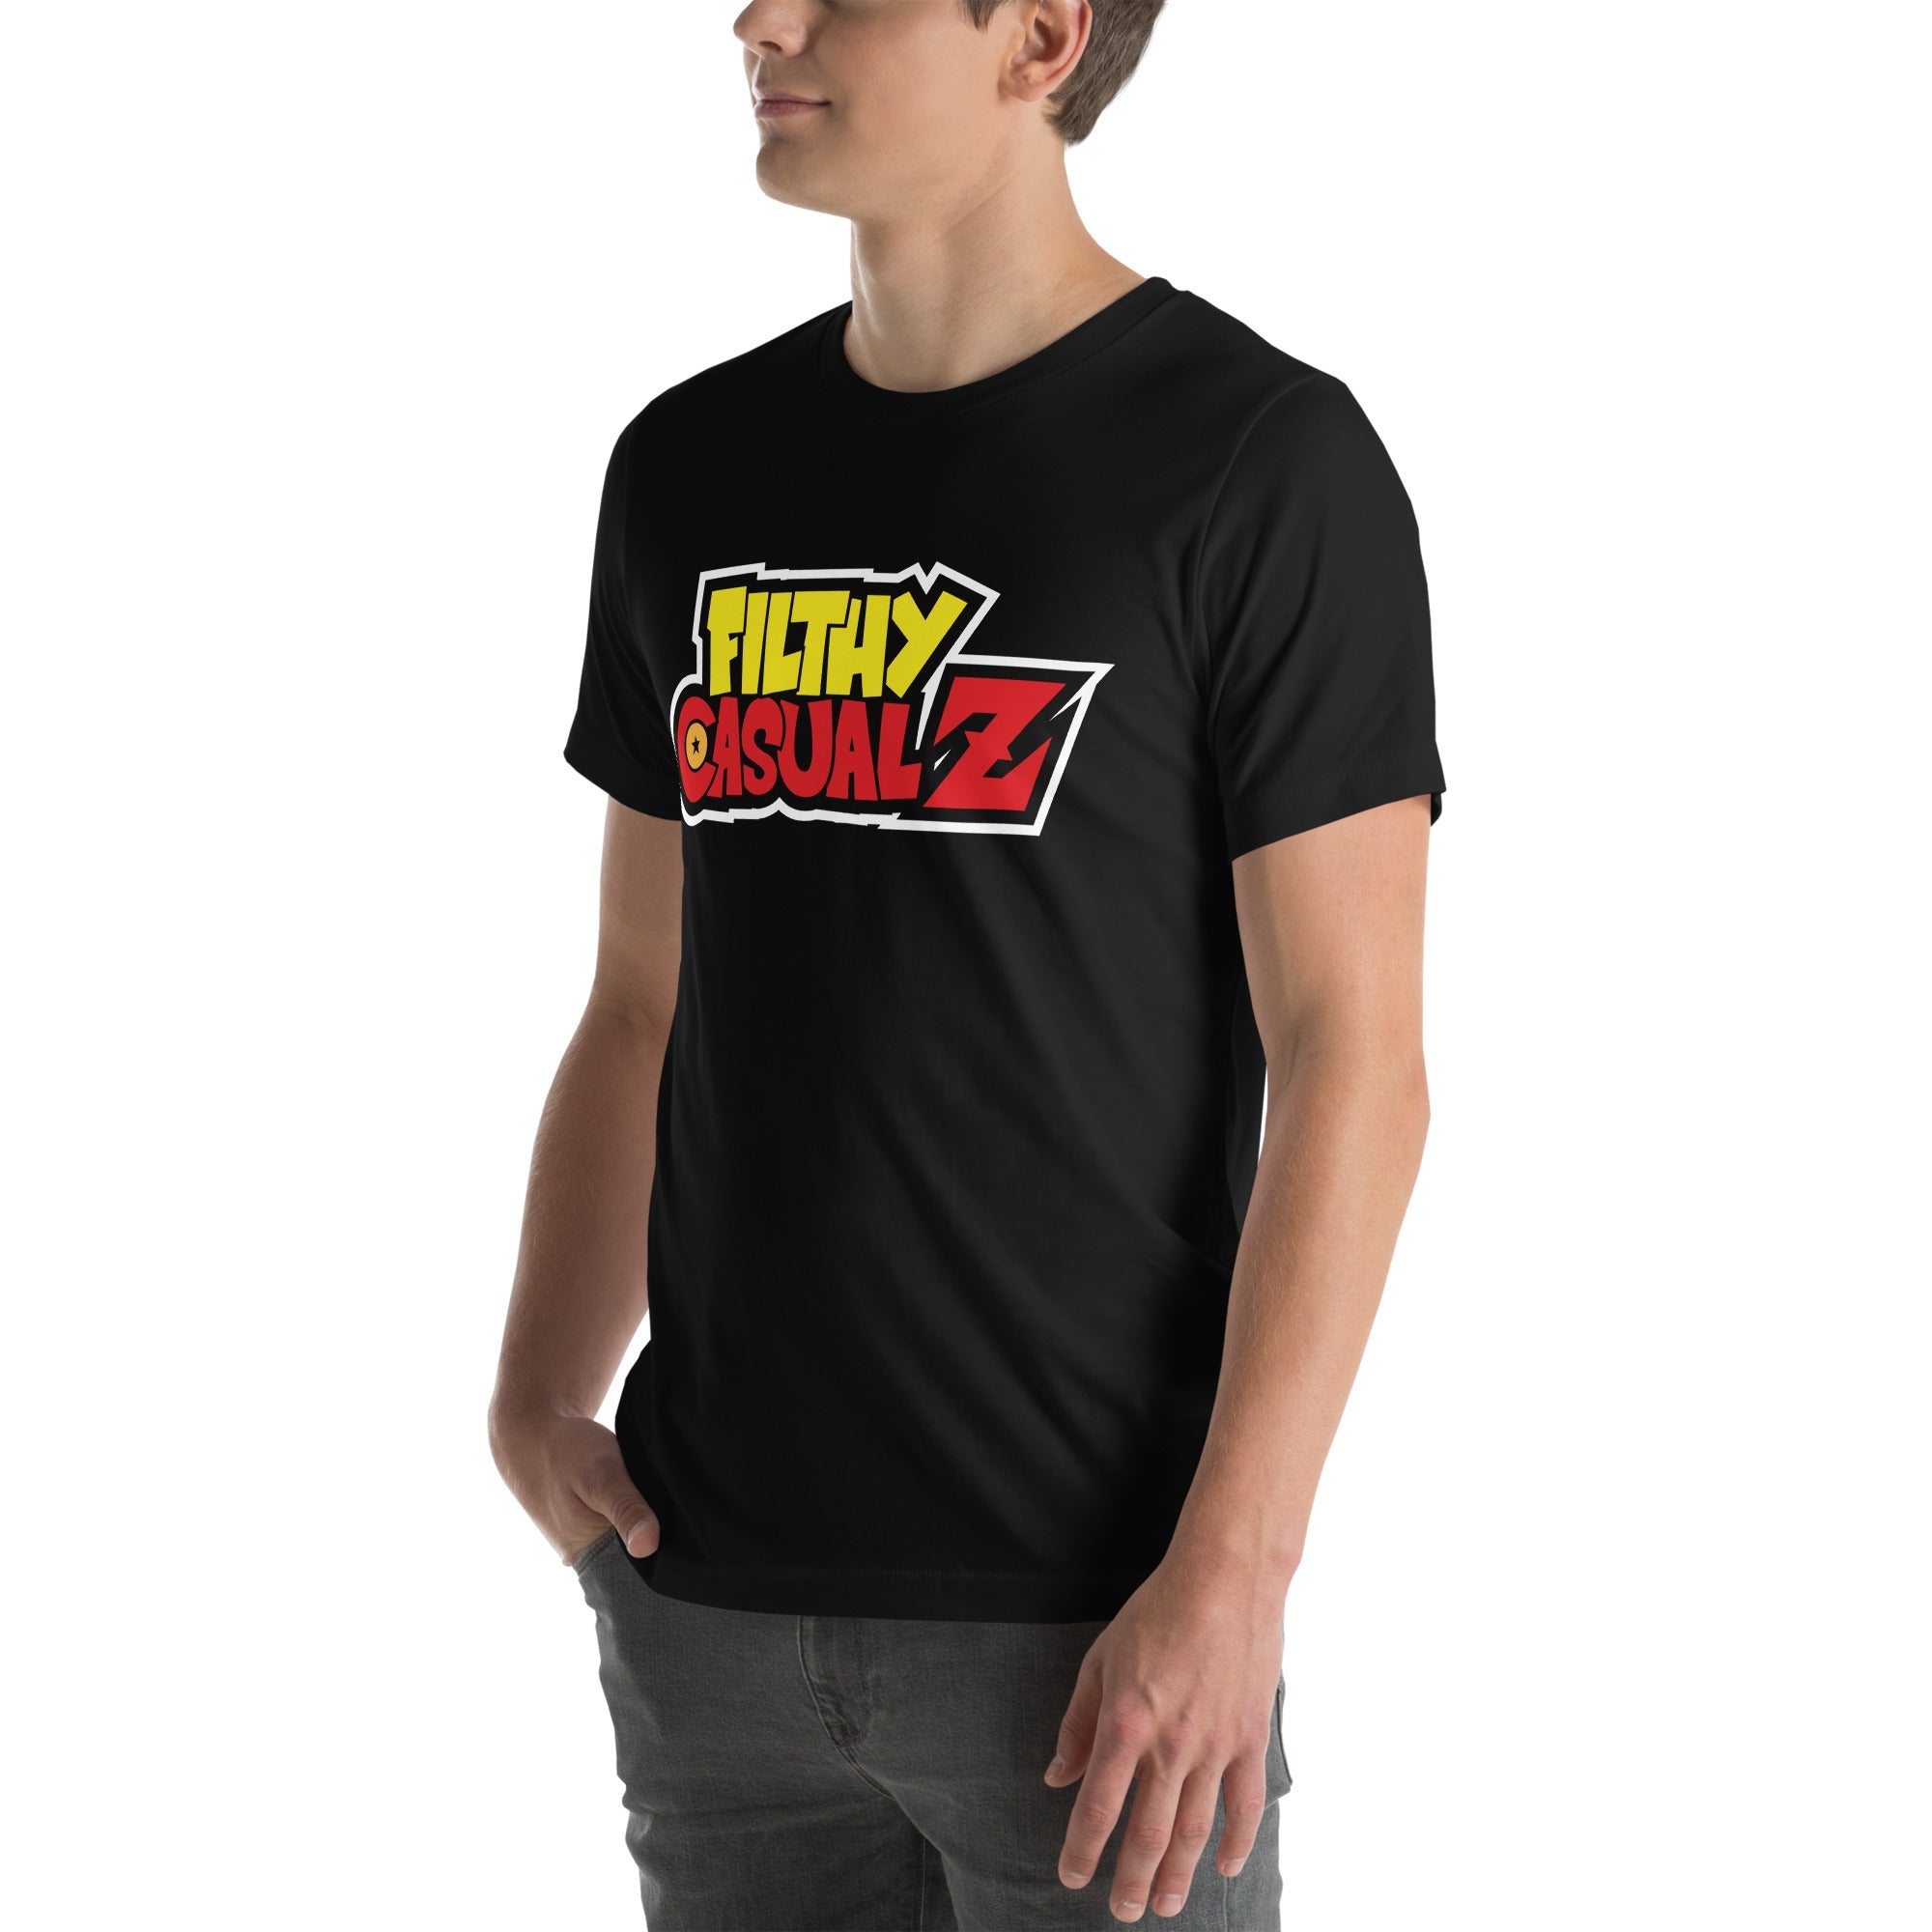 Filthy Casual Z T-Shirt - Filthy Casual Co.